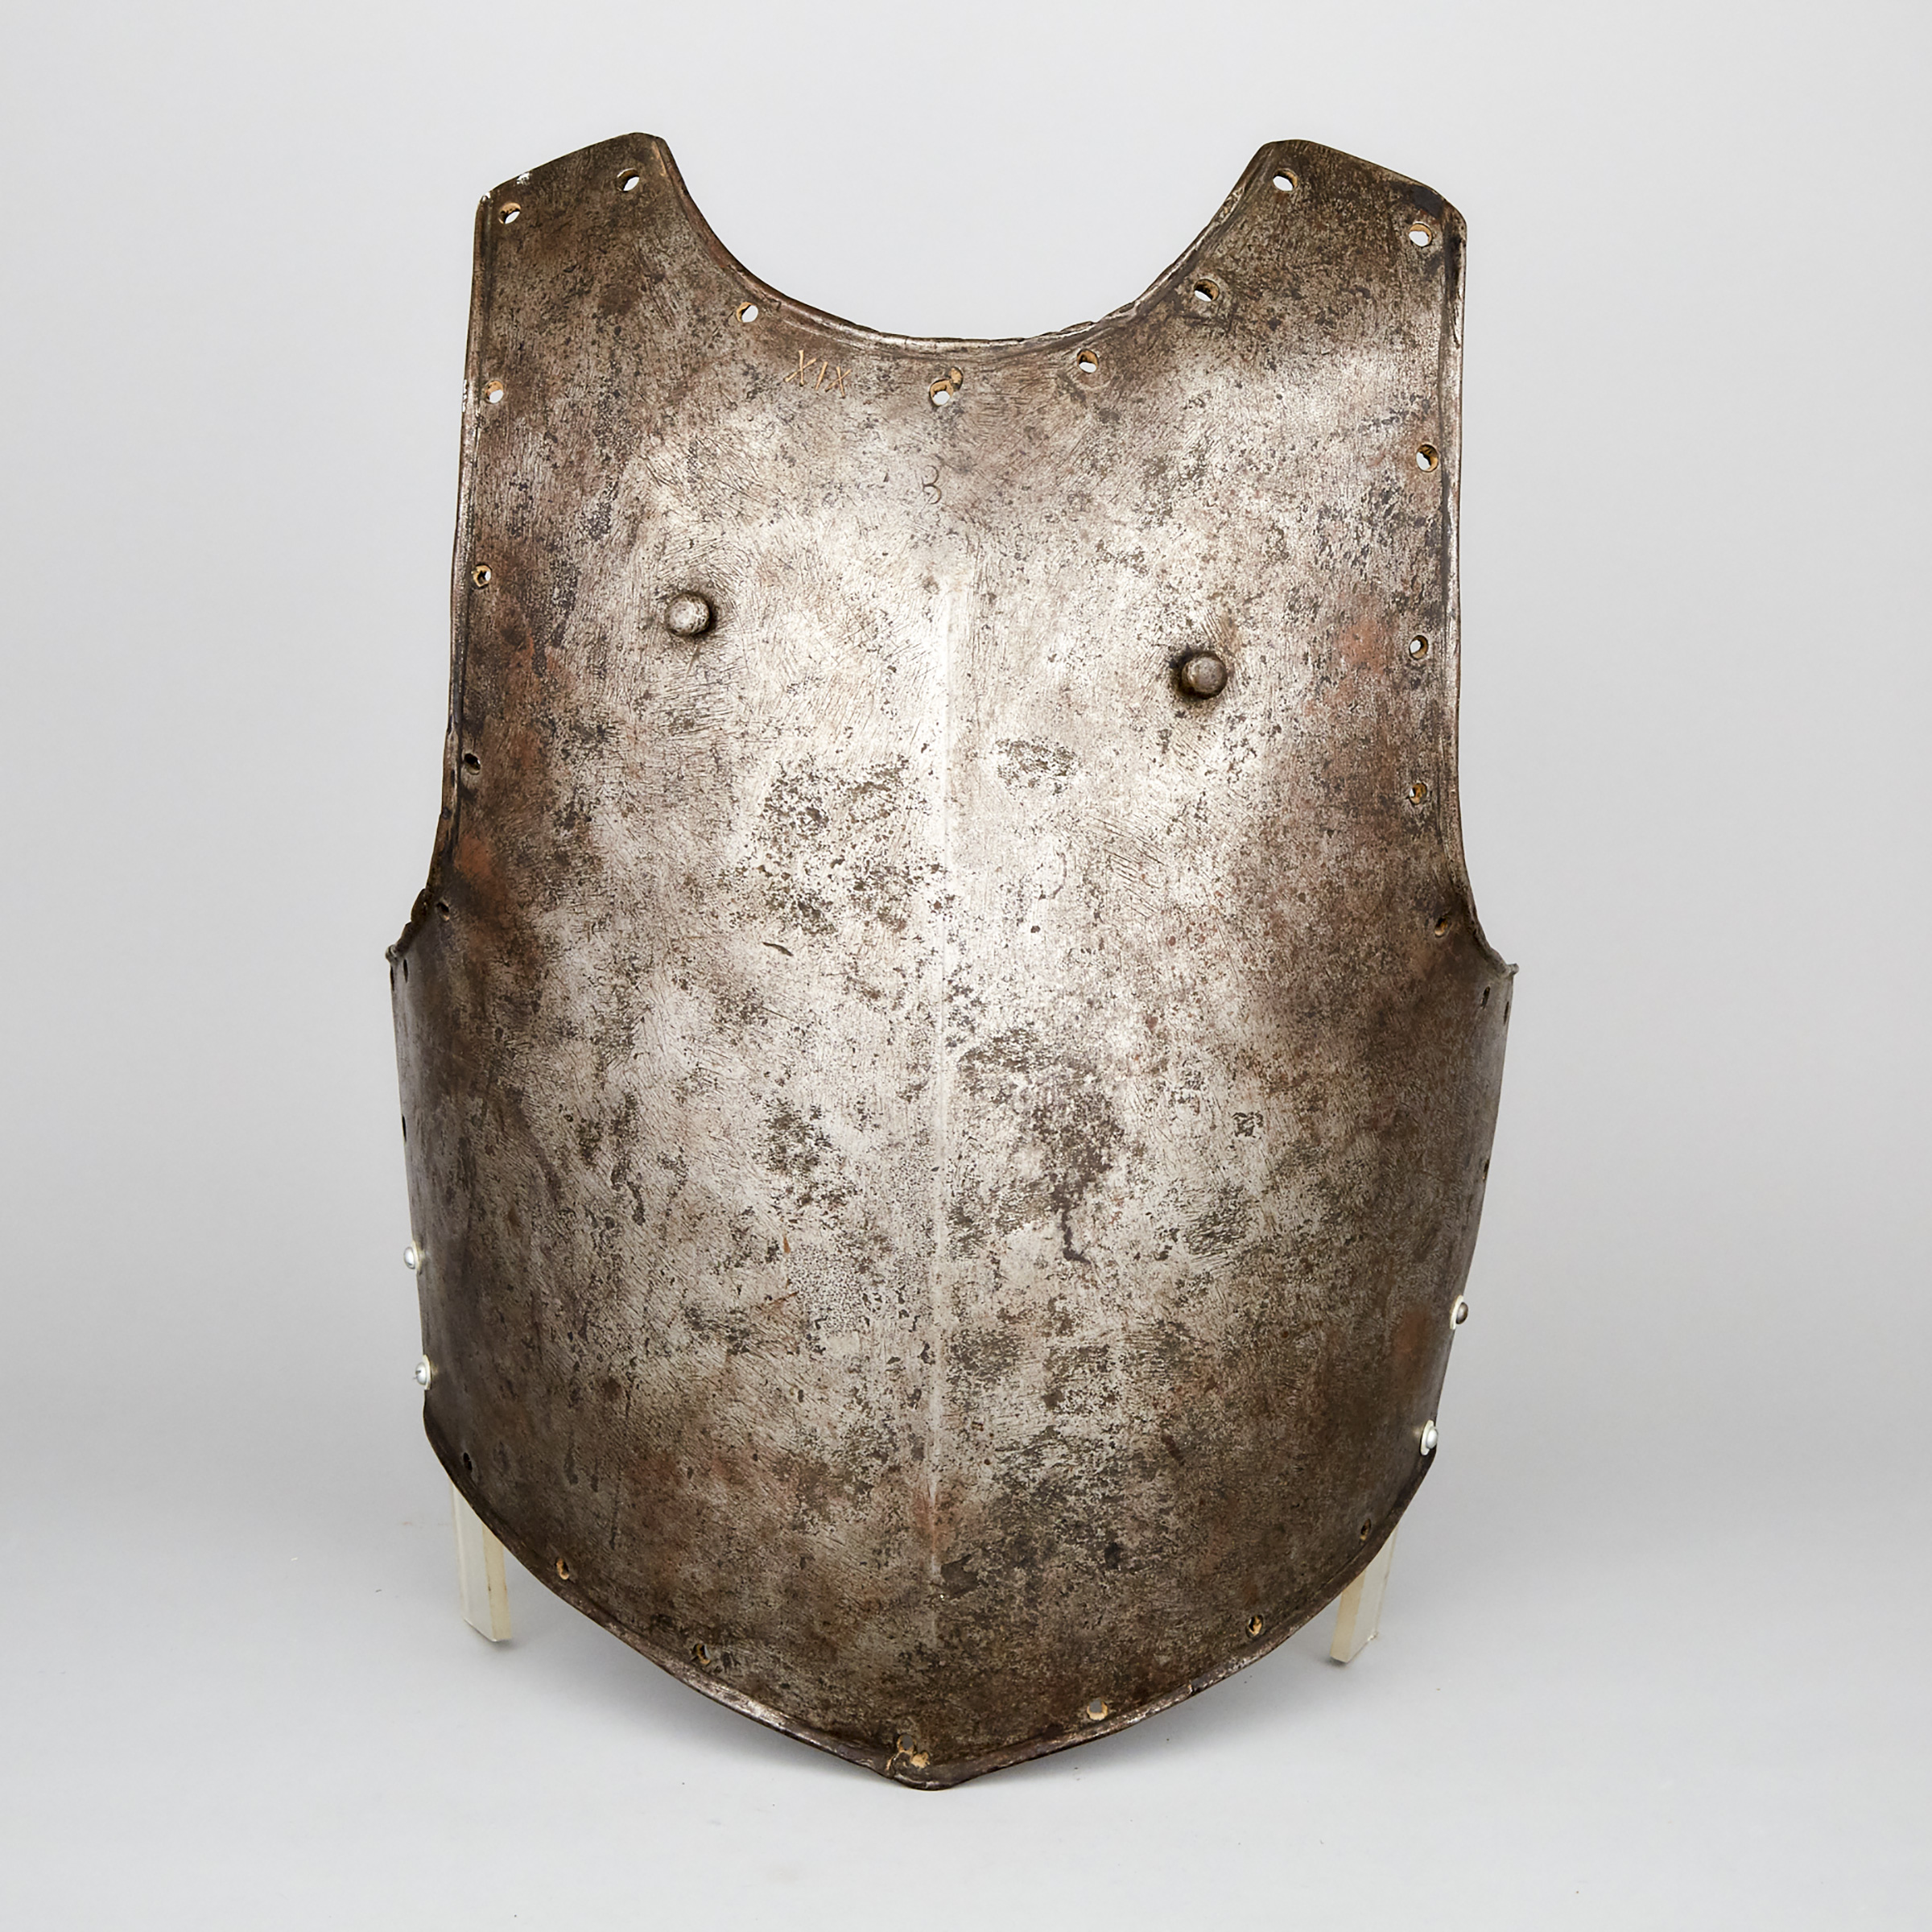 North European Breastplate, early/mid 17th century